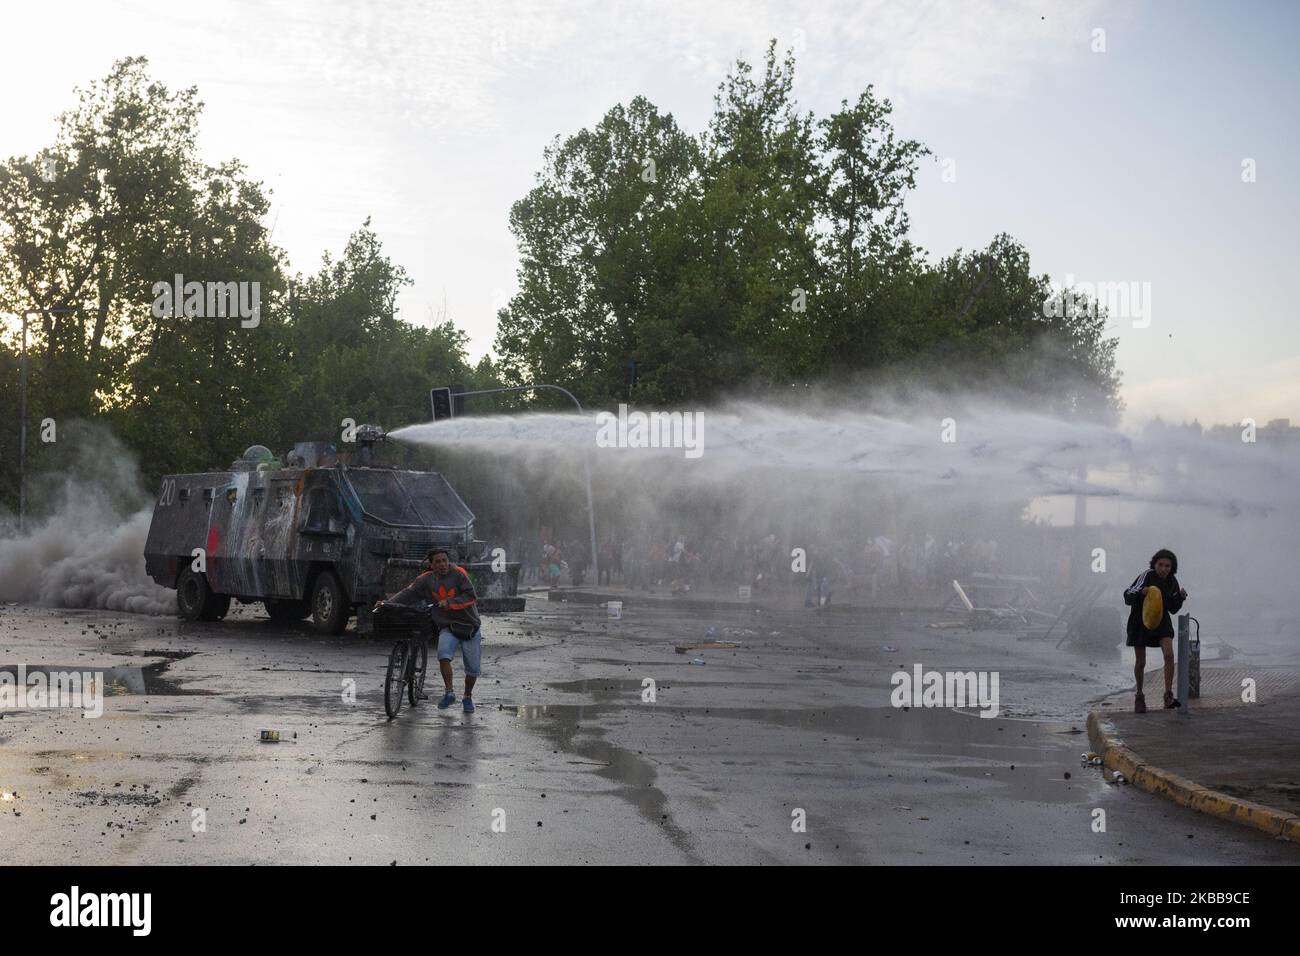 An anti-government demonstrator challenges a police water cannon spray during clashes with police in Santiago, Chile, Thursday, October 30, 2019. (Photo by Jeremias Gonzalez/NurPhoto) Stock Photo